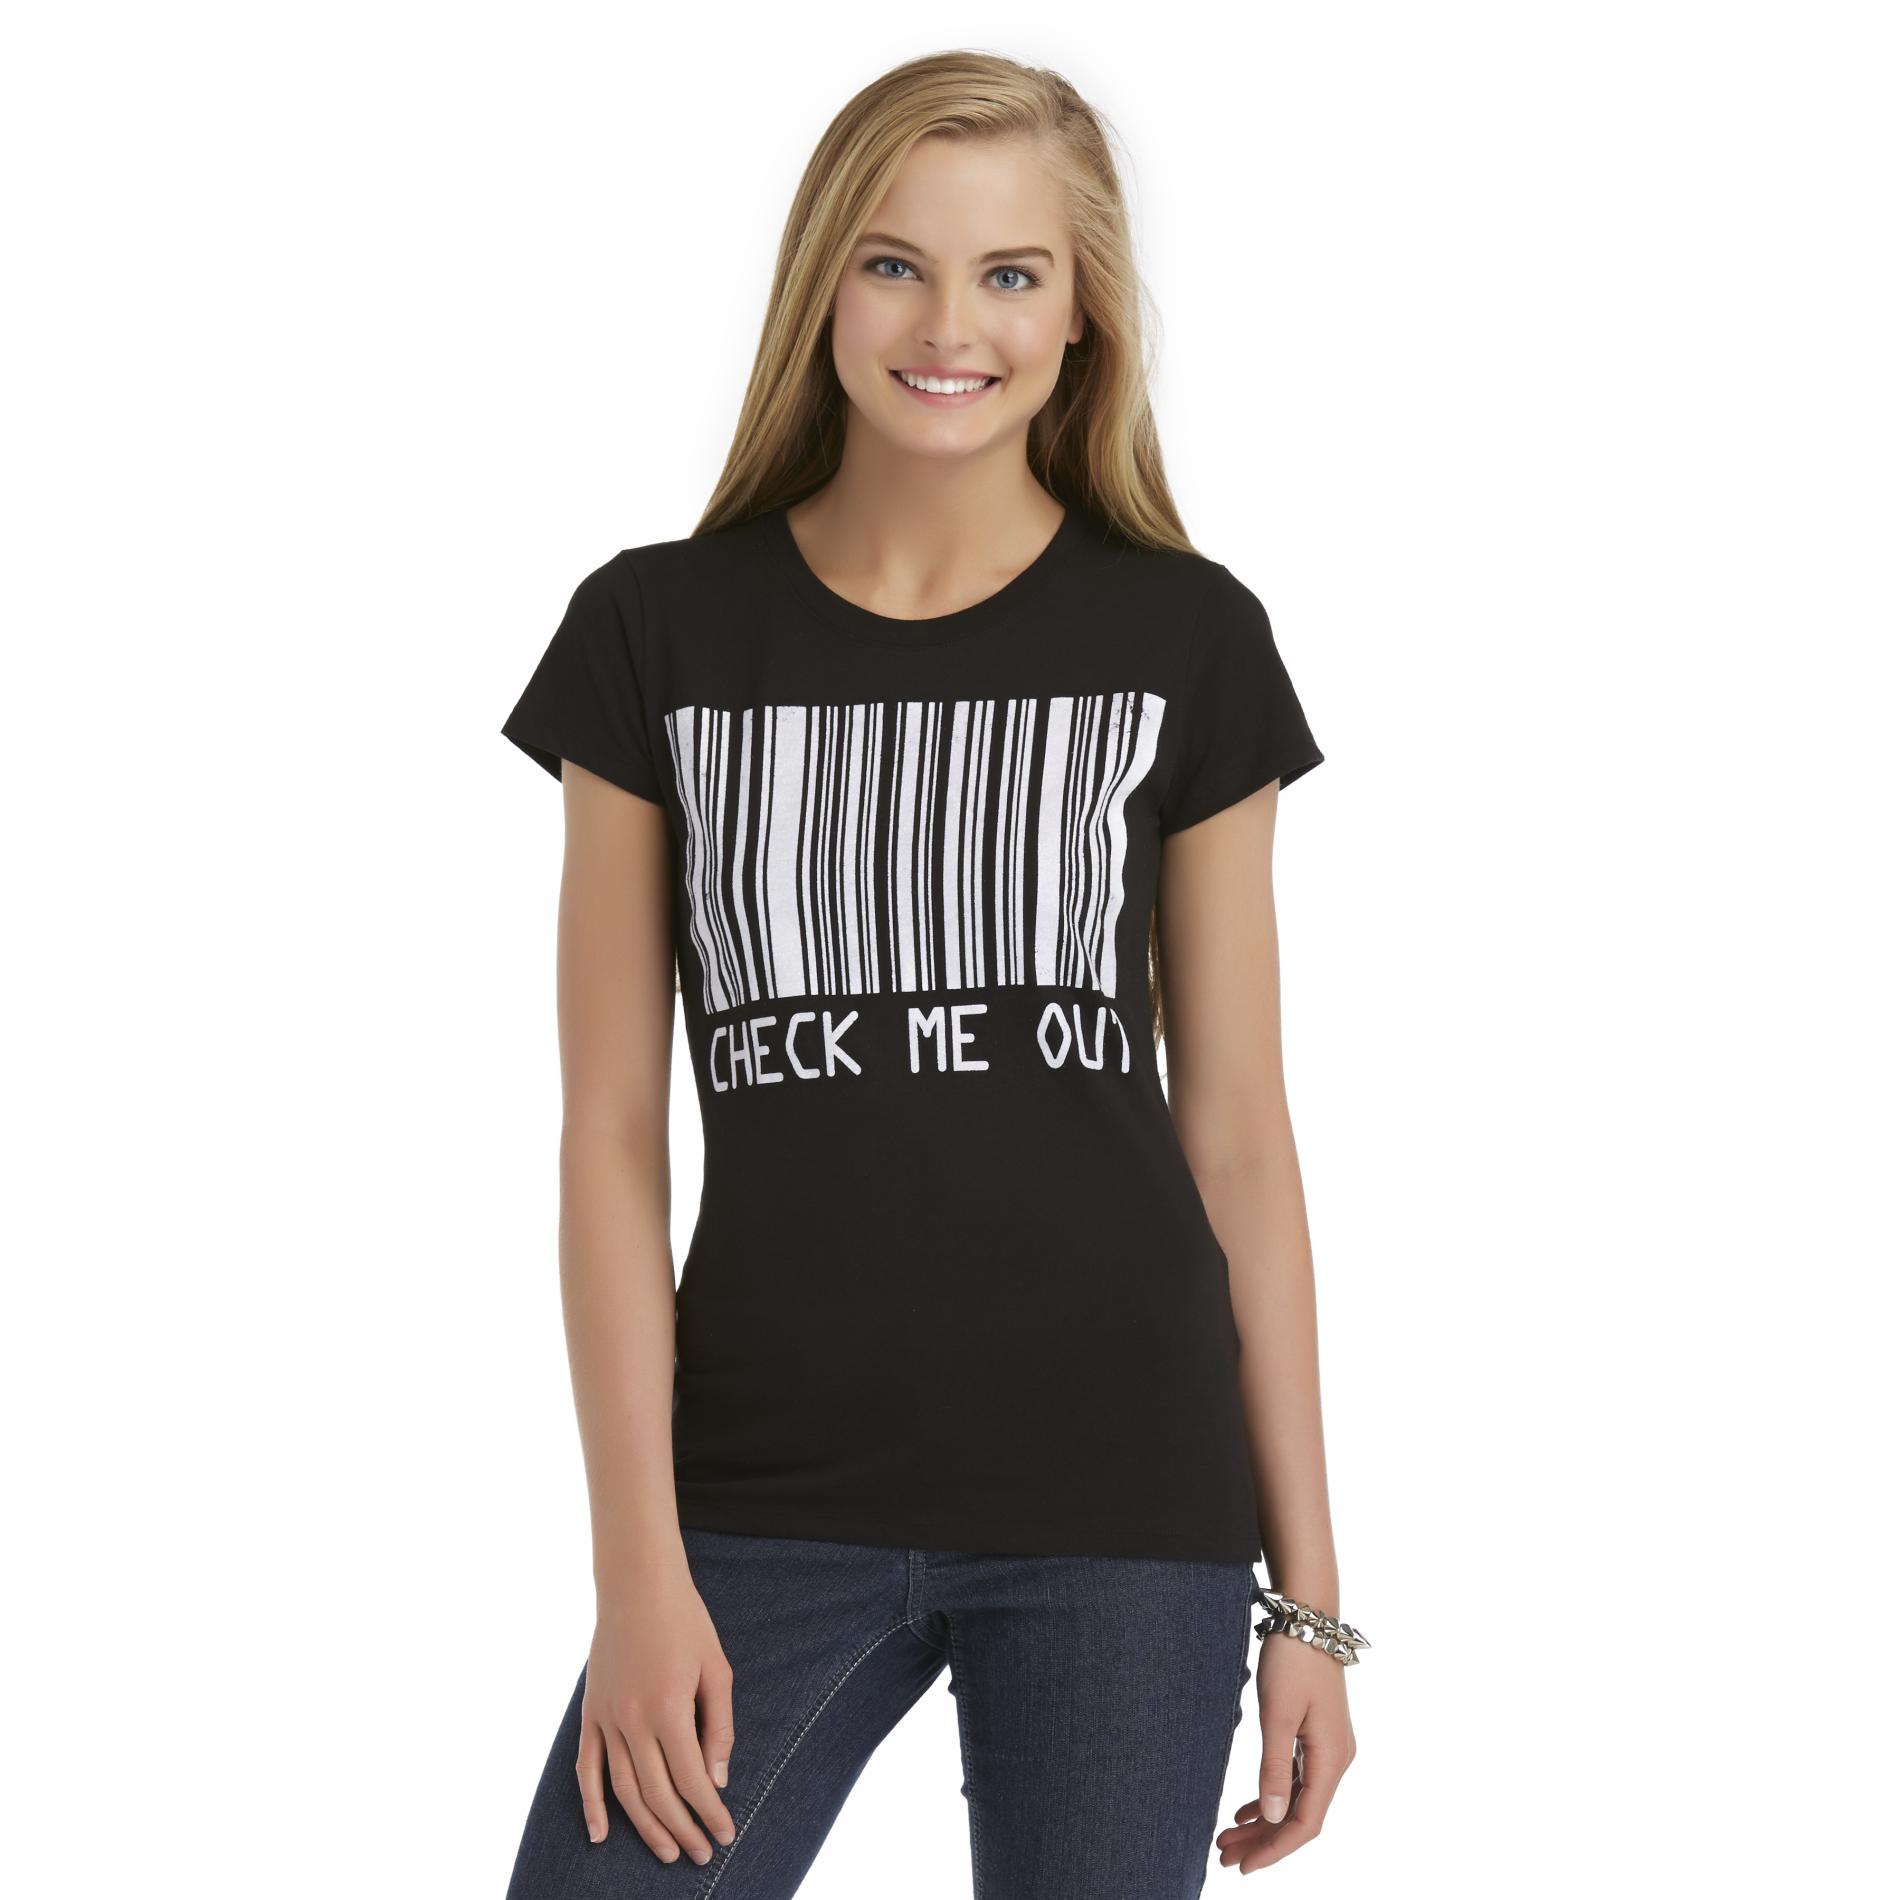 Women's Graphic T-Shirt - Check Me Out